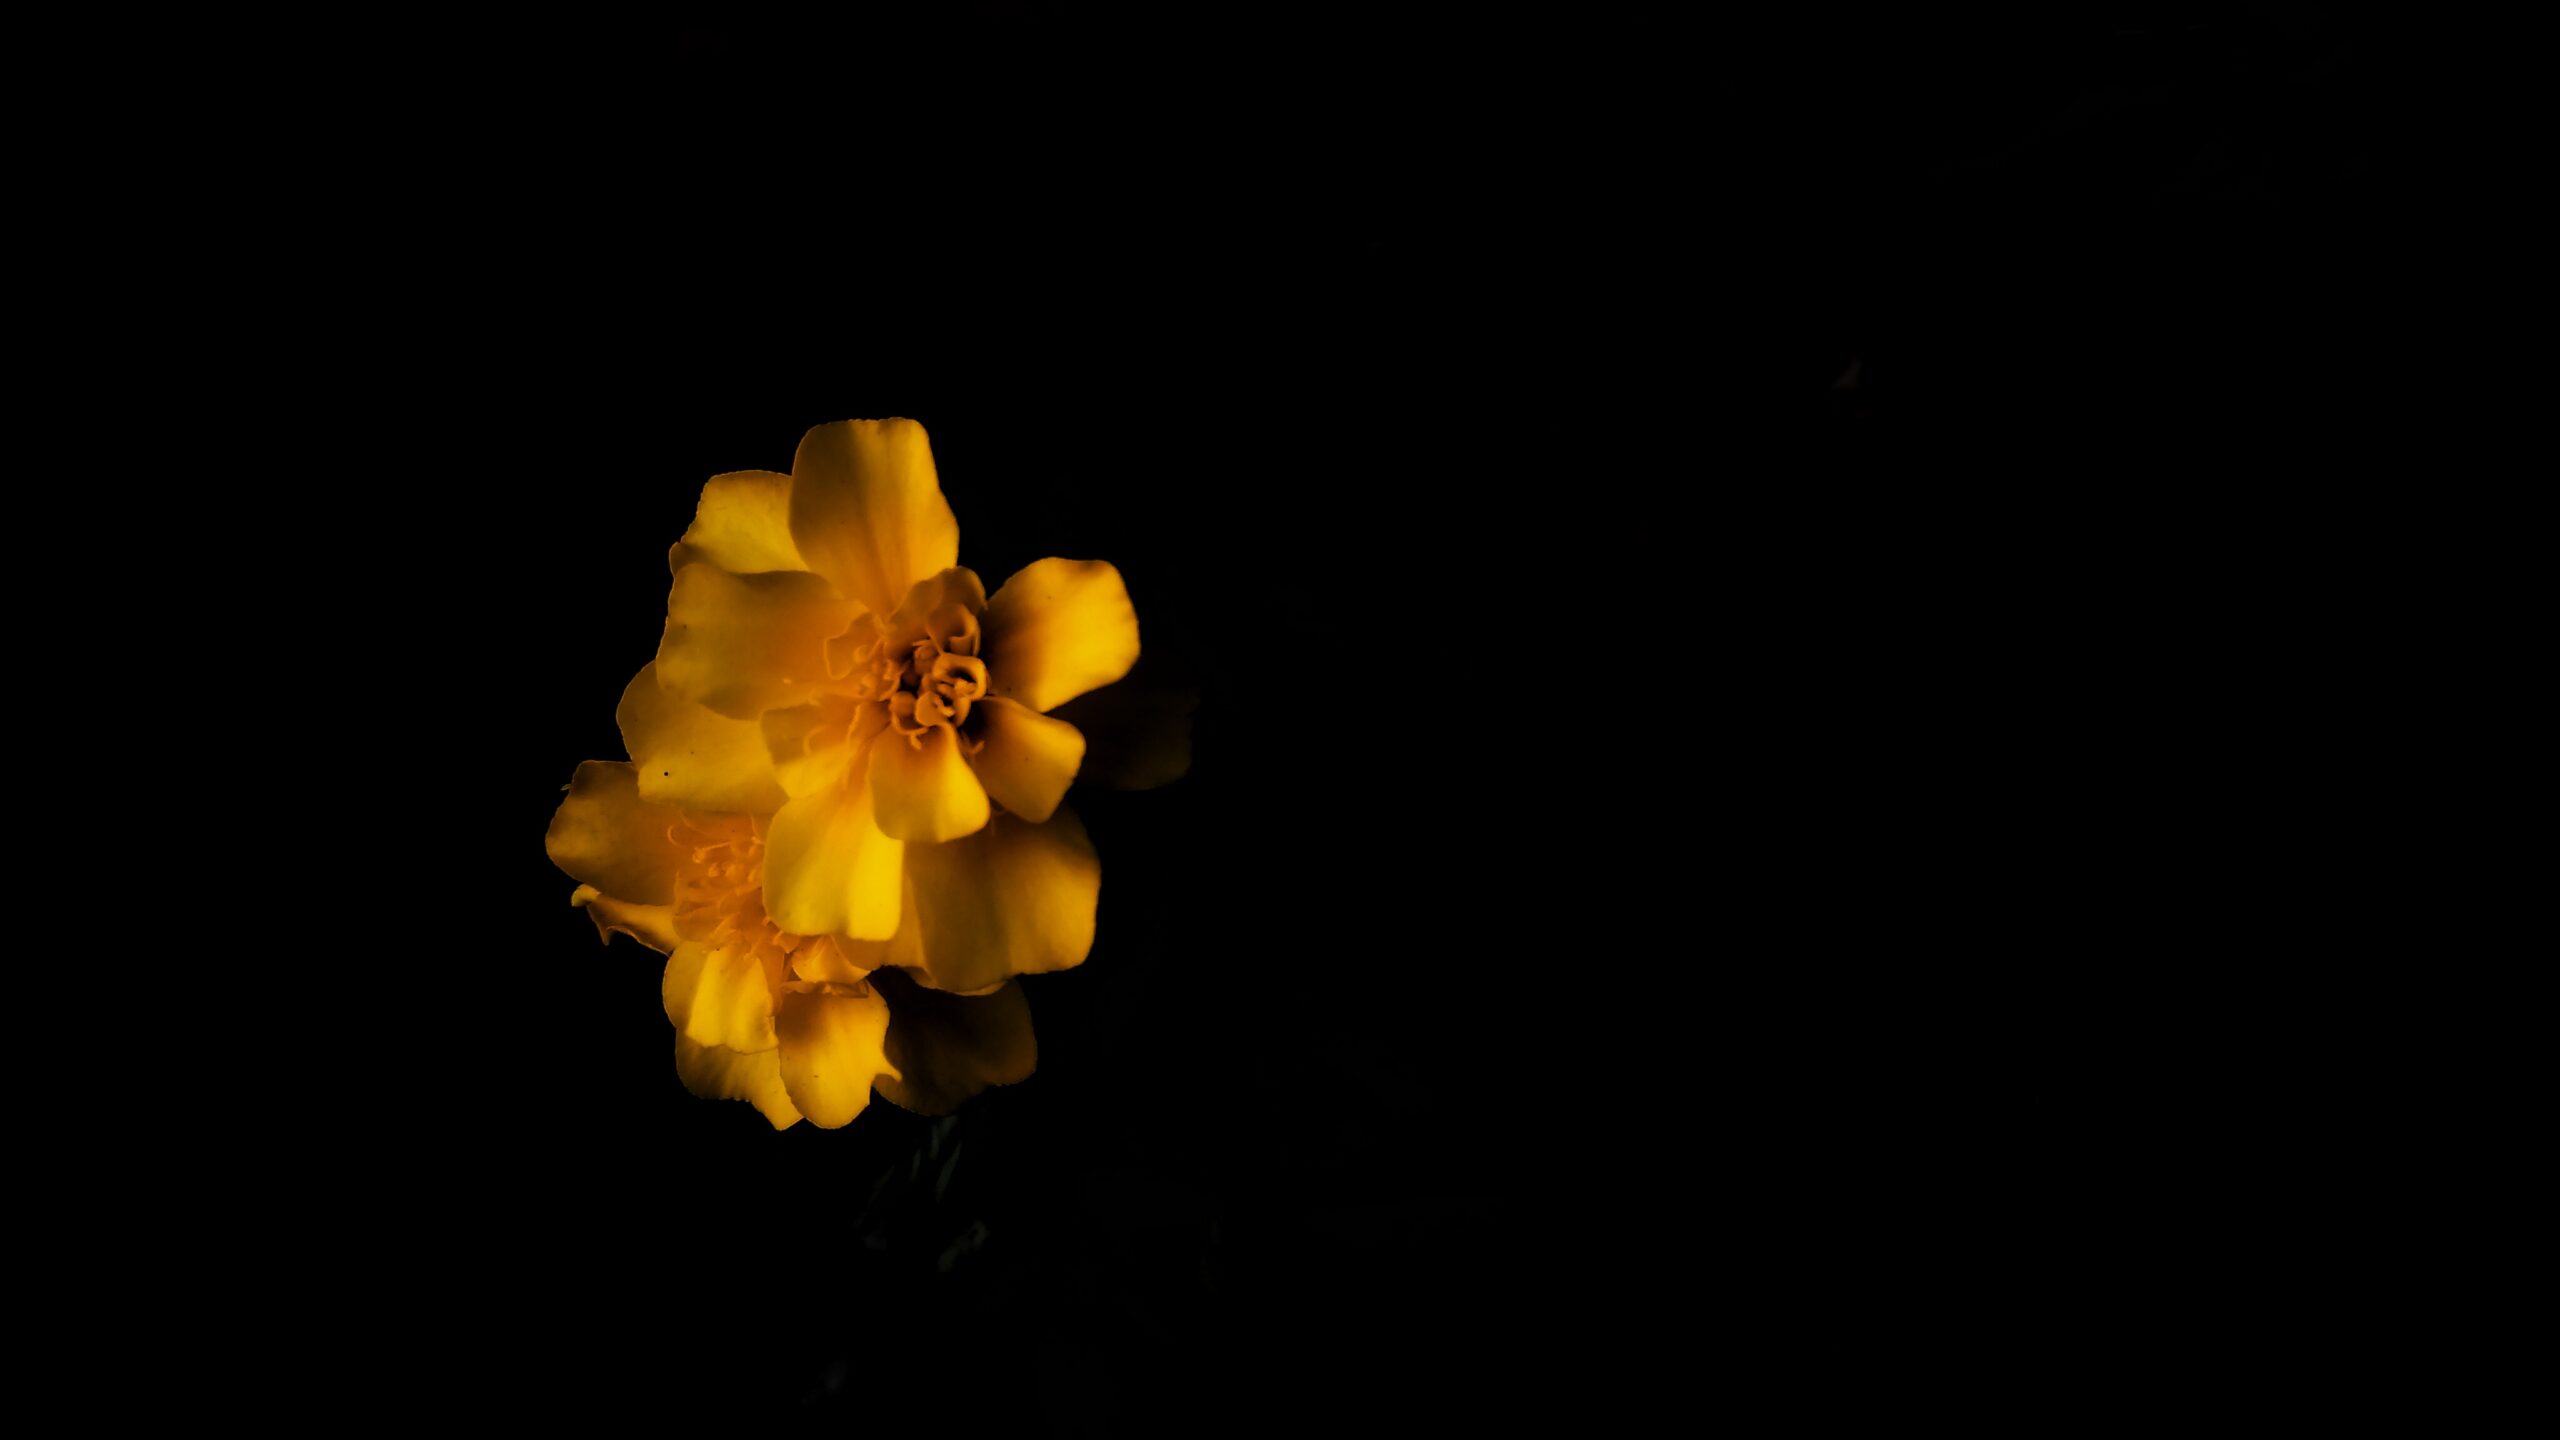 Yellow marigold flower with black background